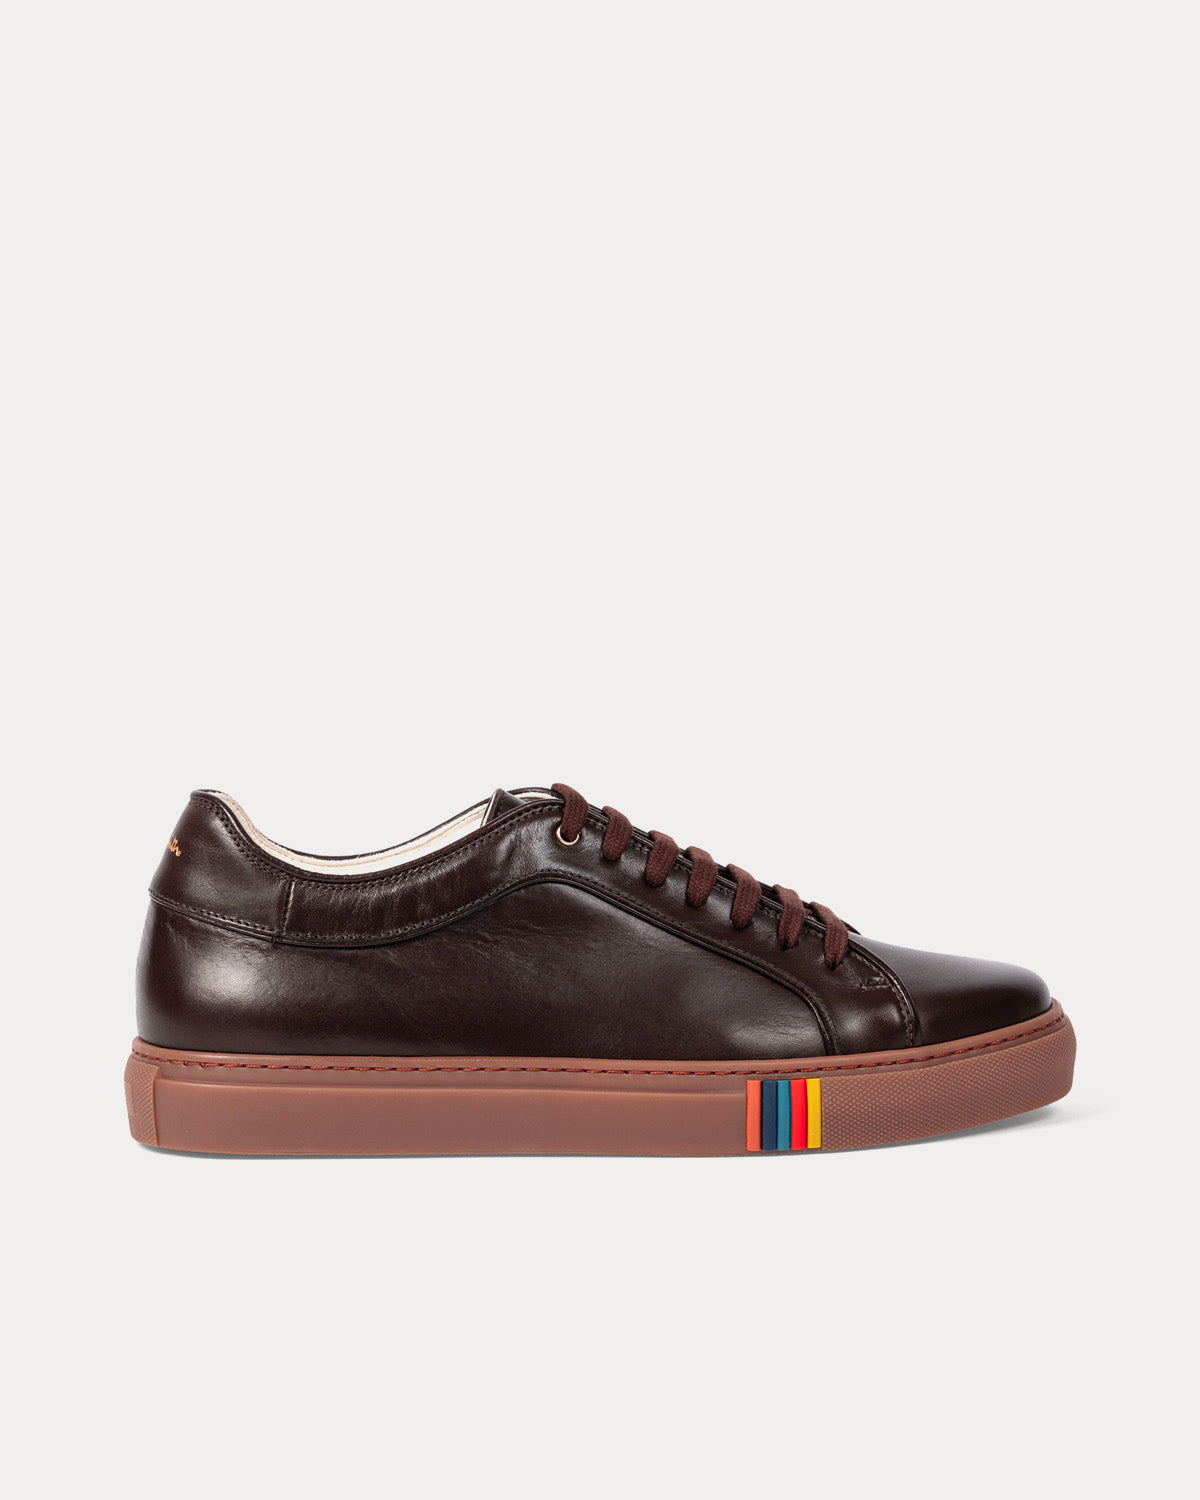 Paul Smith - Basso with Artist Stripe Leather Dark Brown Low Top Sneakers